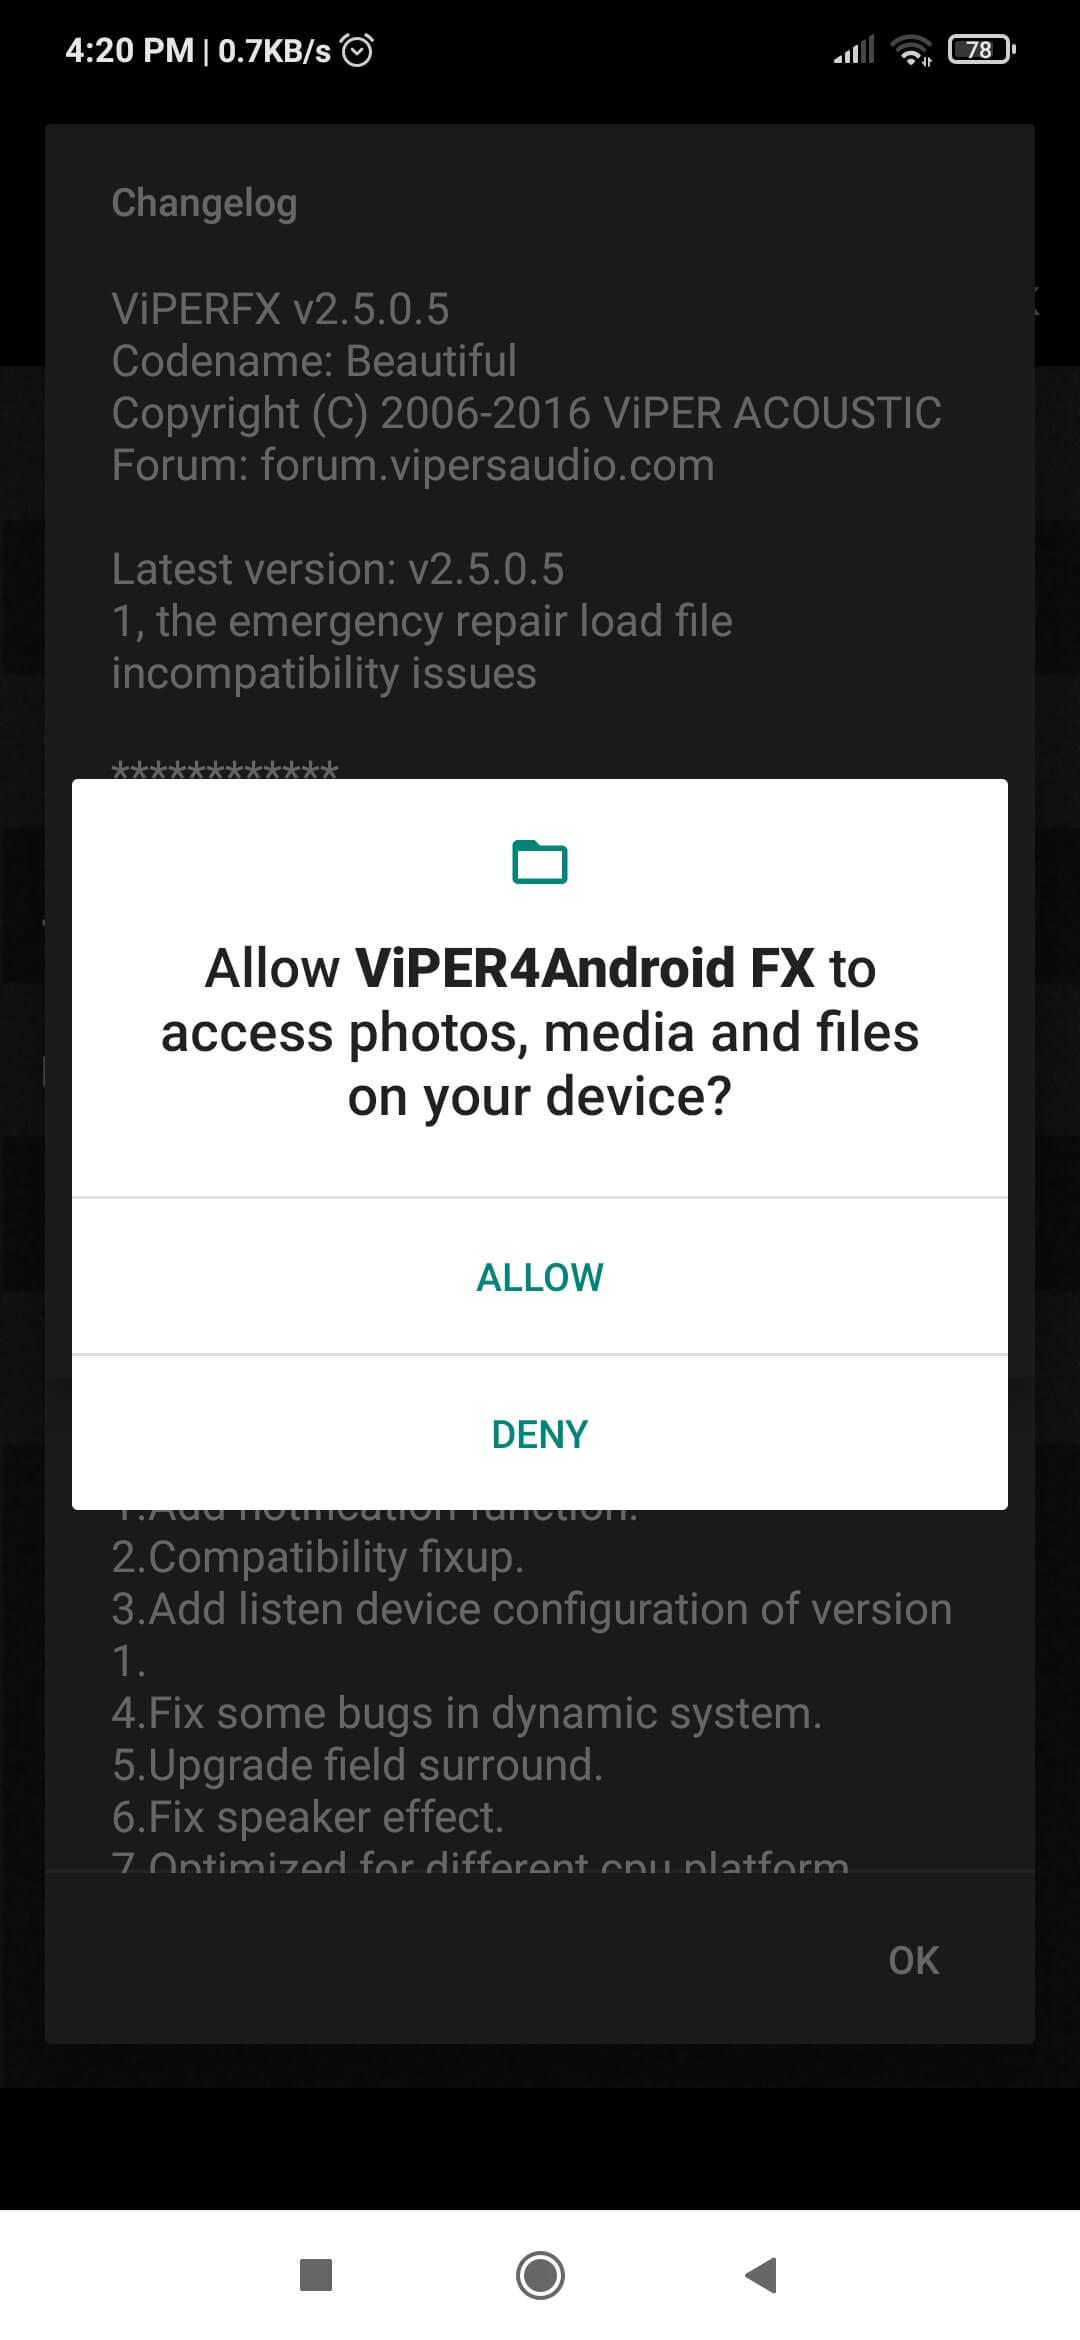 Viper4Android FX on Android